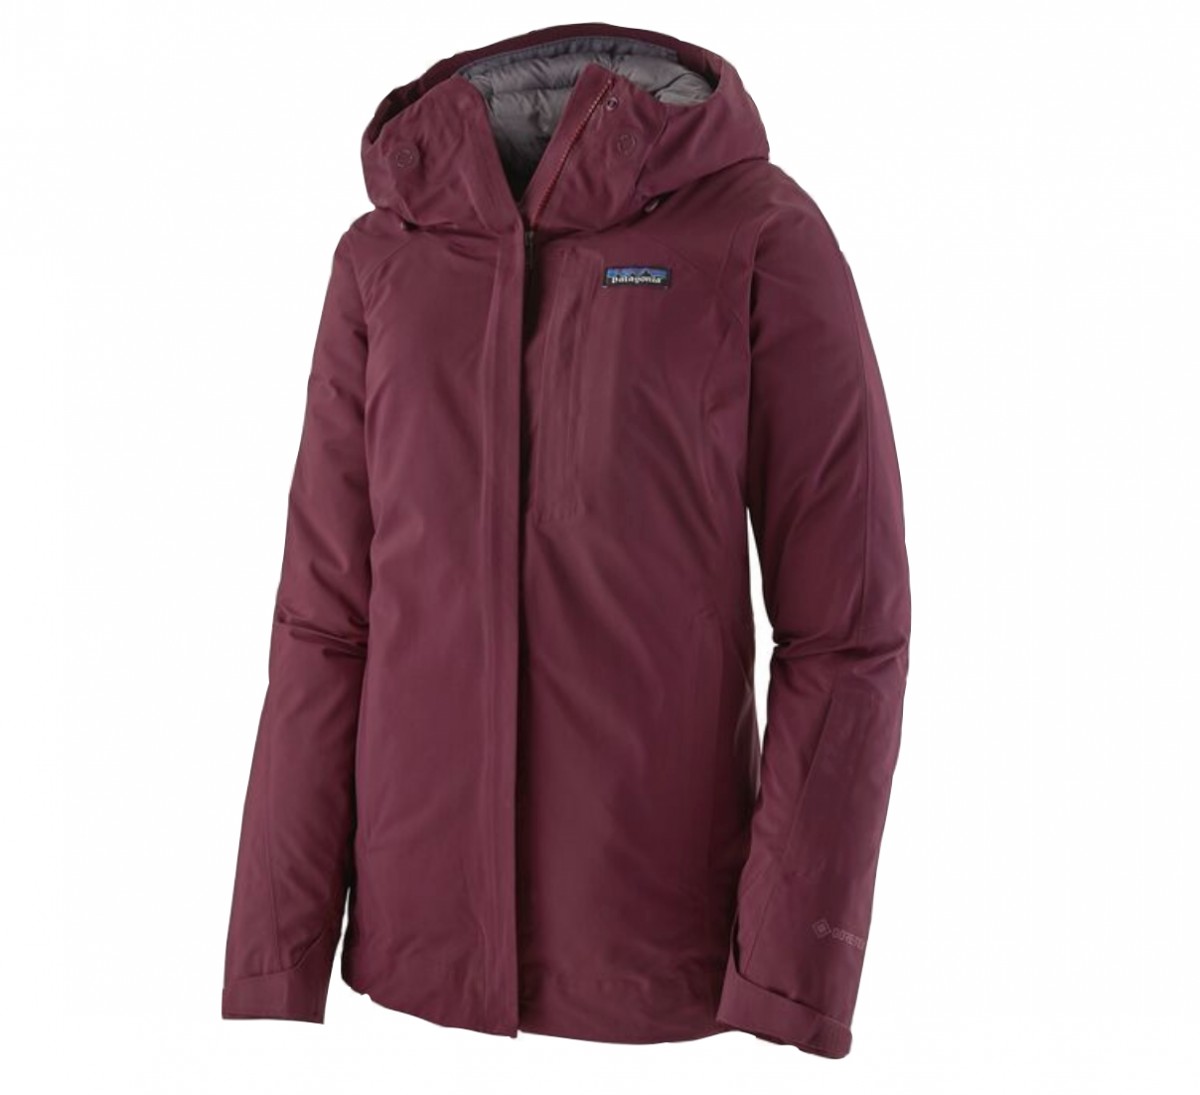 Patagonia Primo Puff - Women's Review